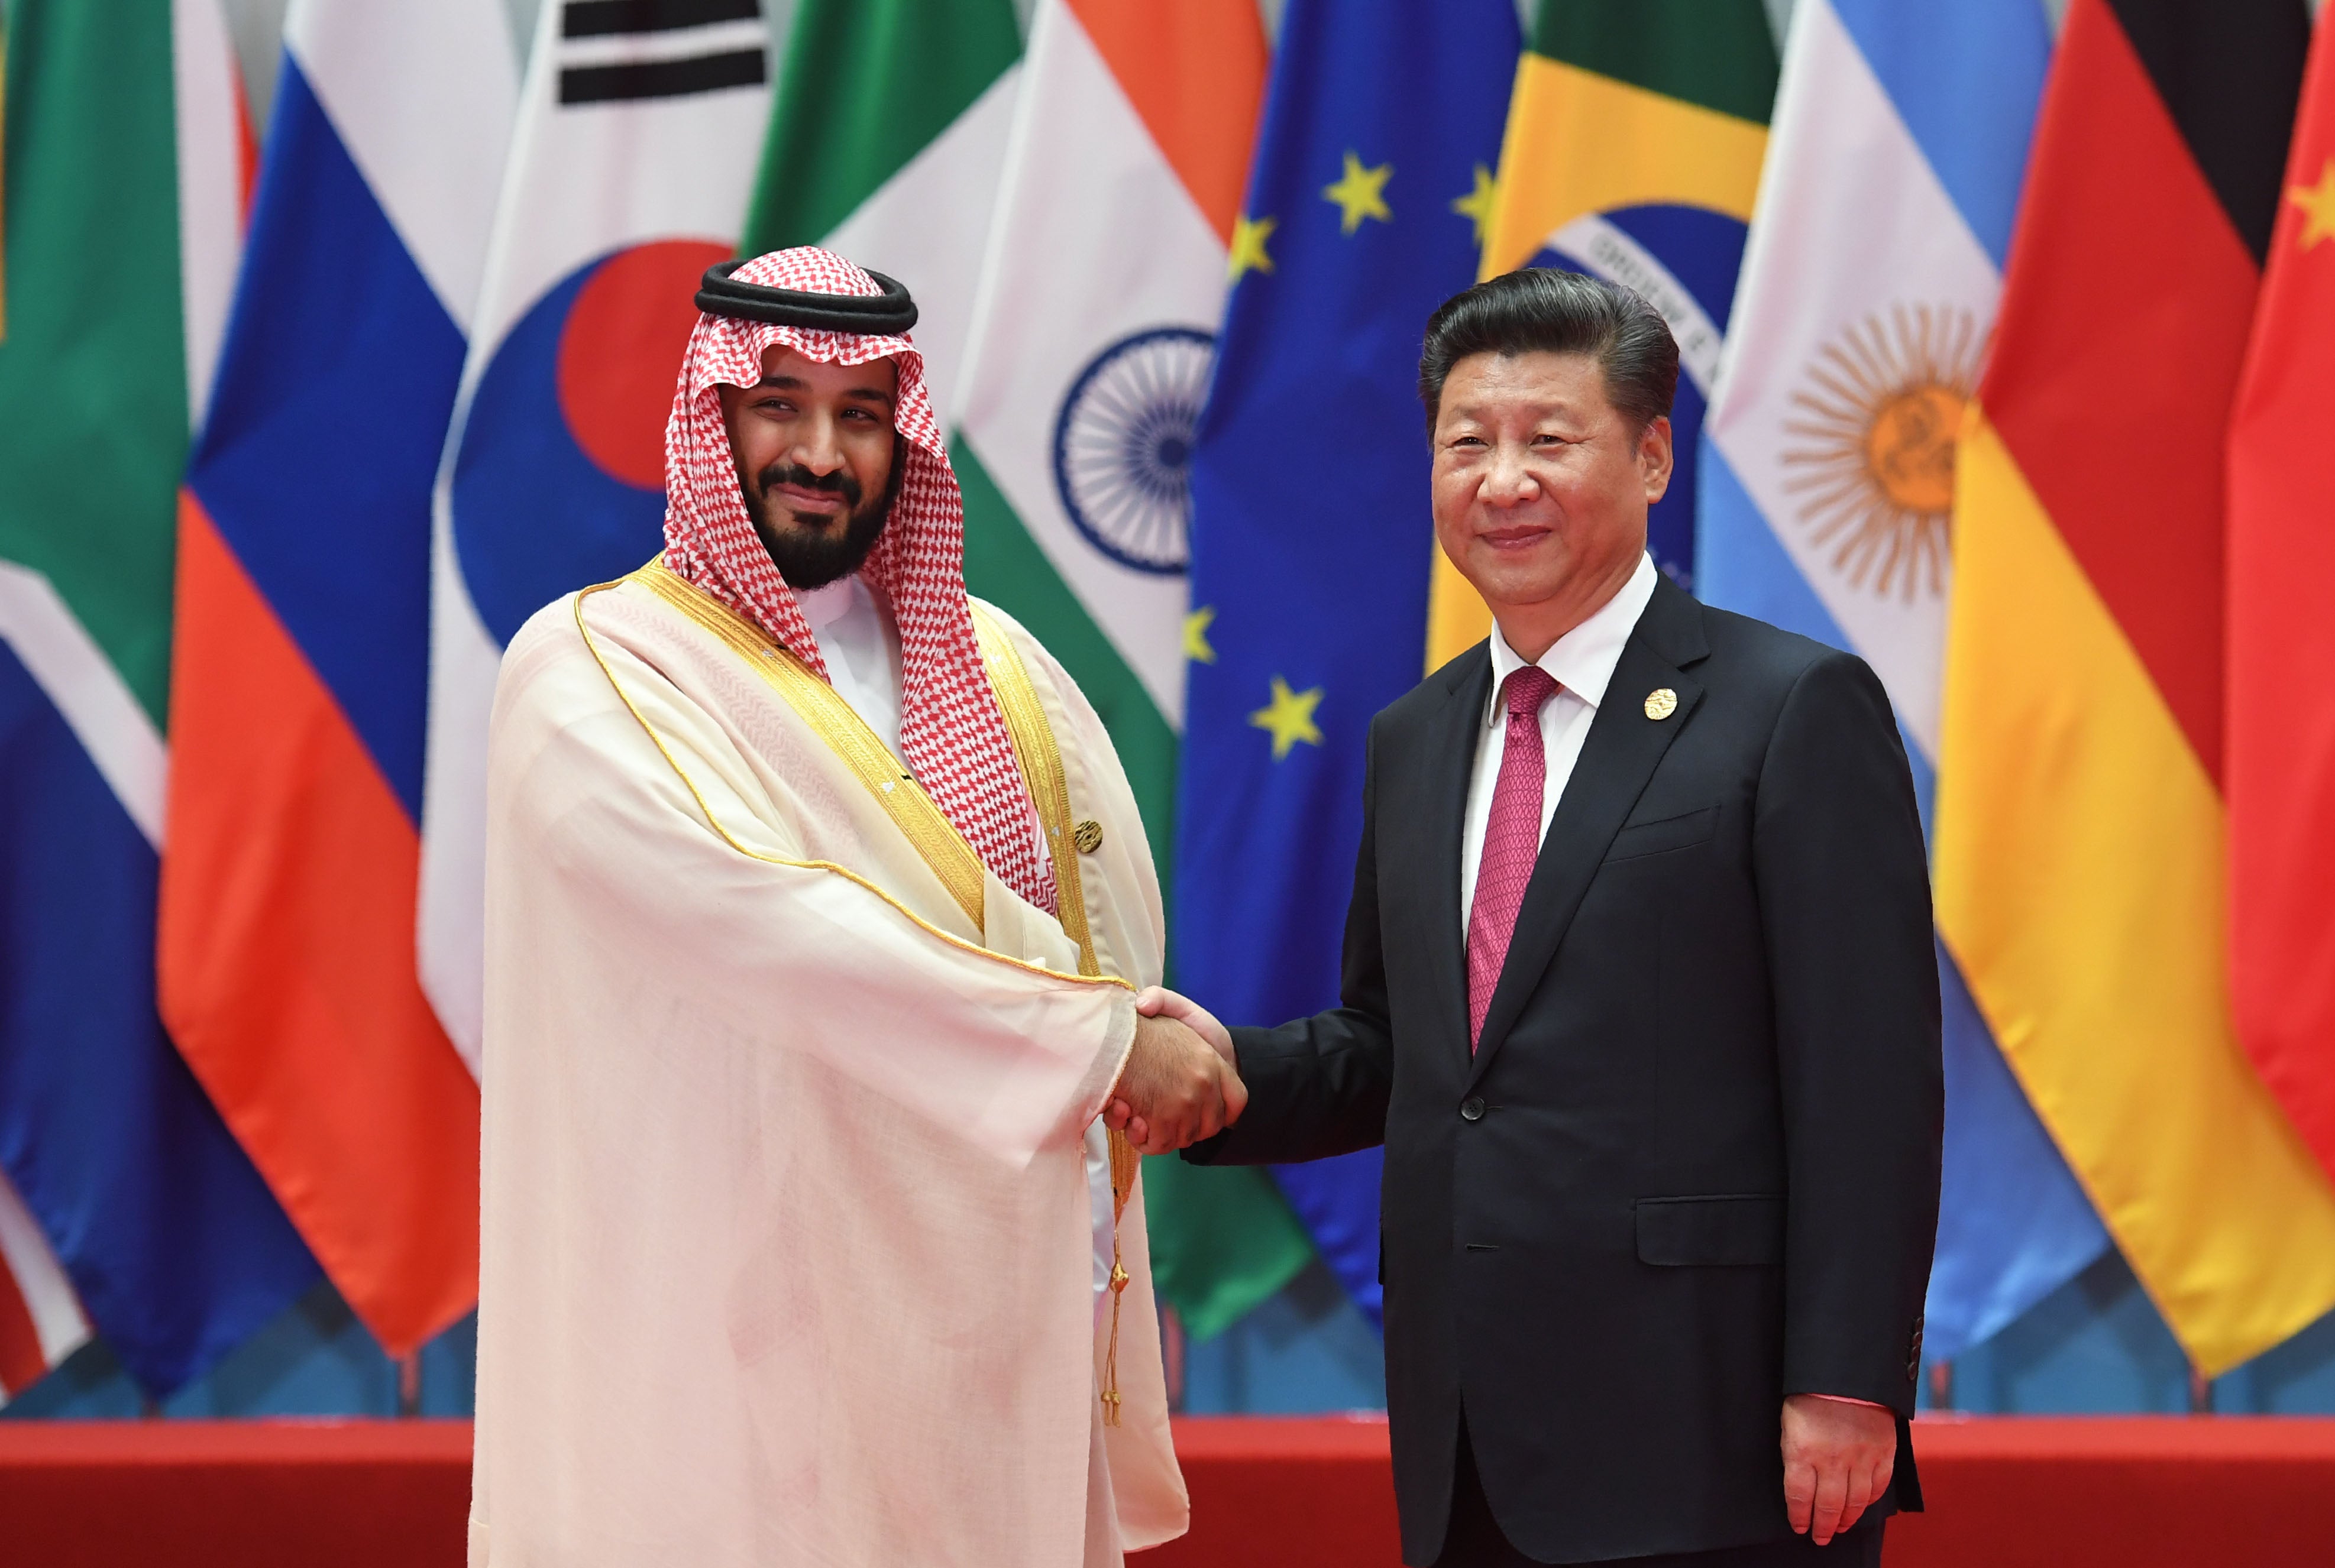 Saudi Arabia Crown Prince Mohammed bin Salman Al Saud shakes hands with China’s President Xi Jinping before the G20 leaders’ family photo in Hangzhou in 2016